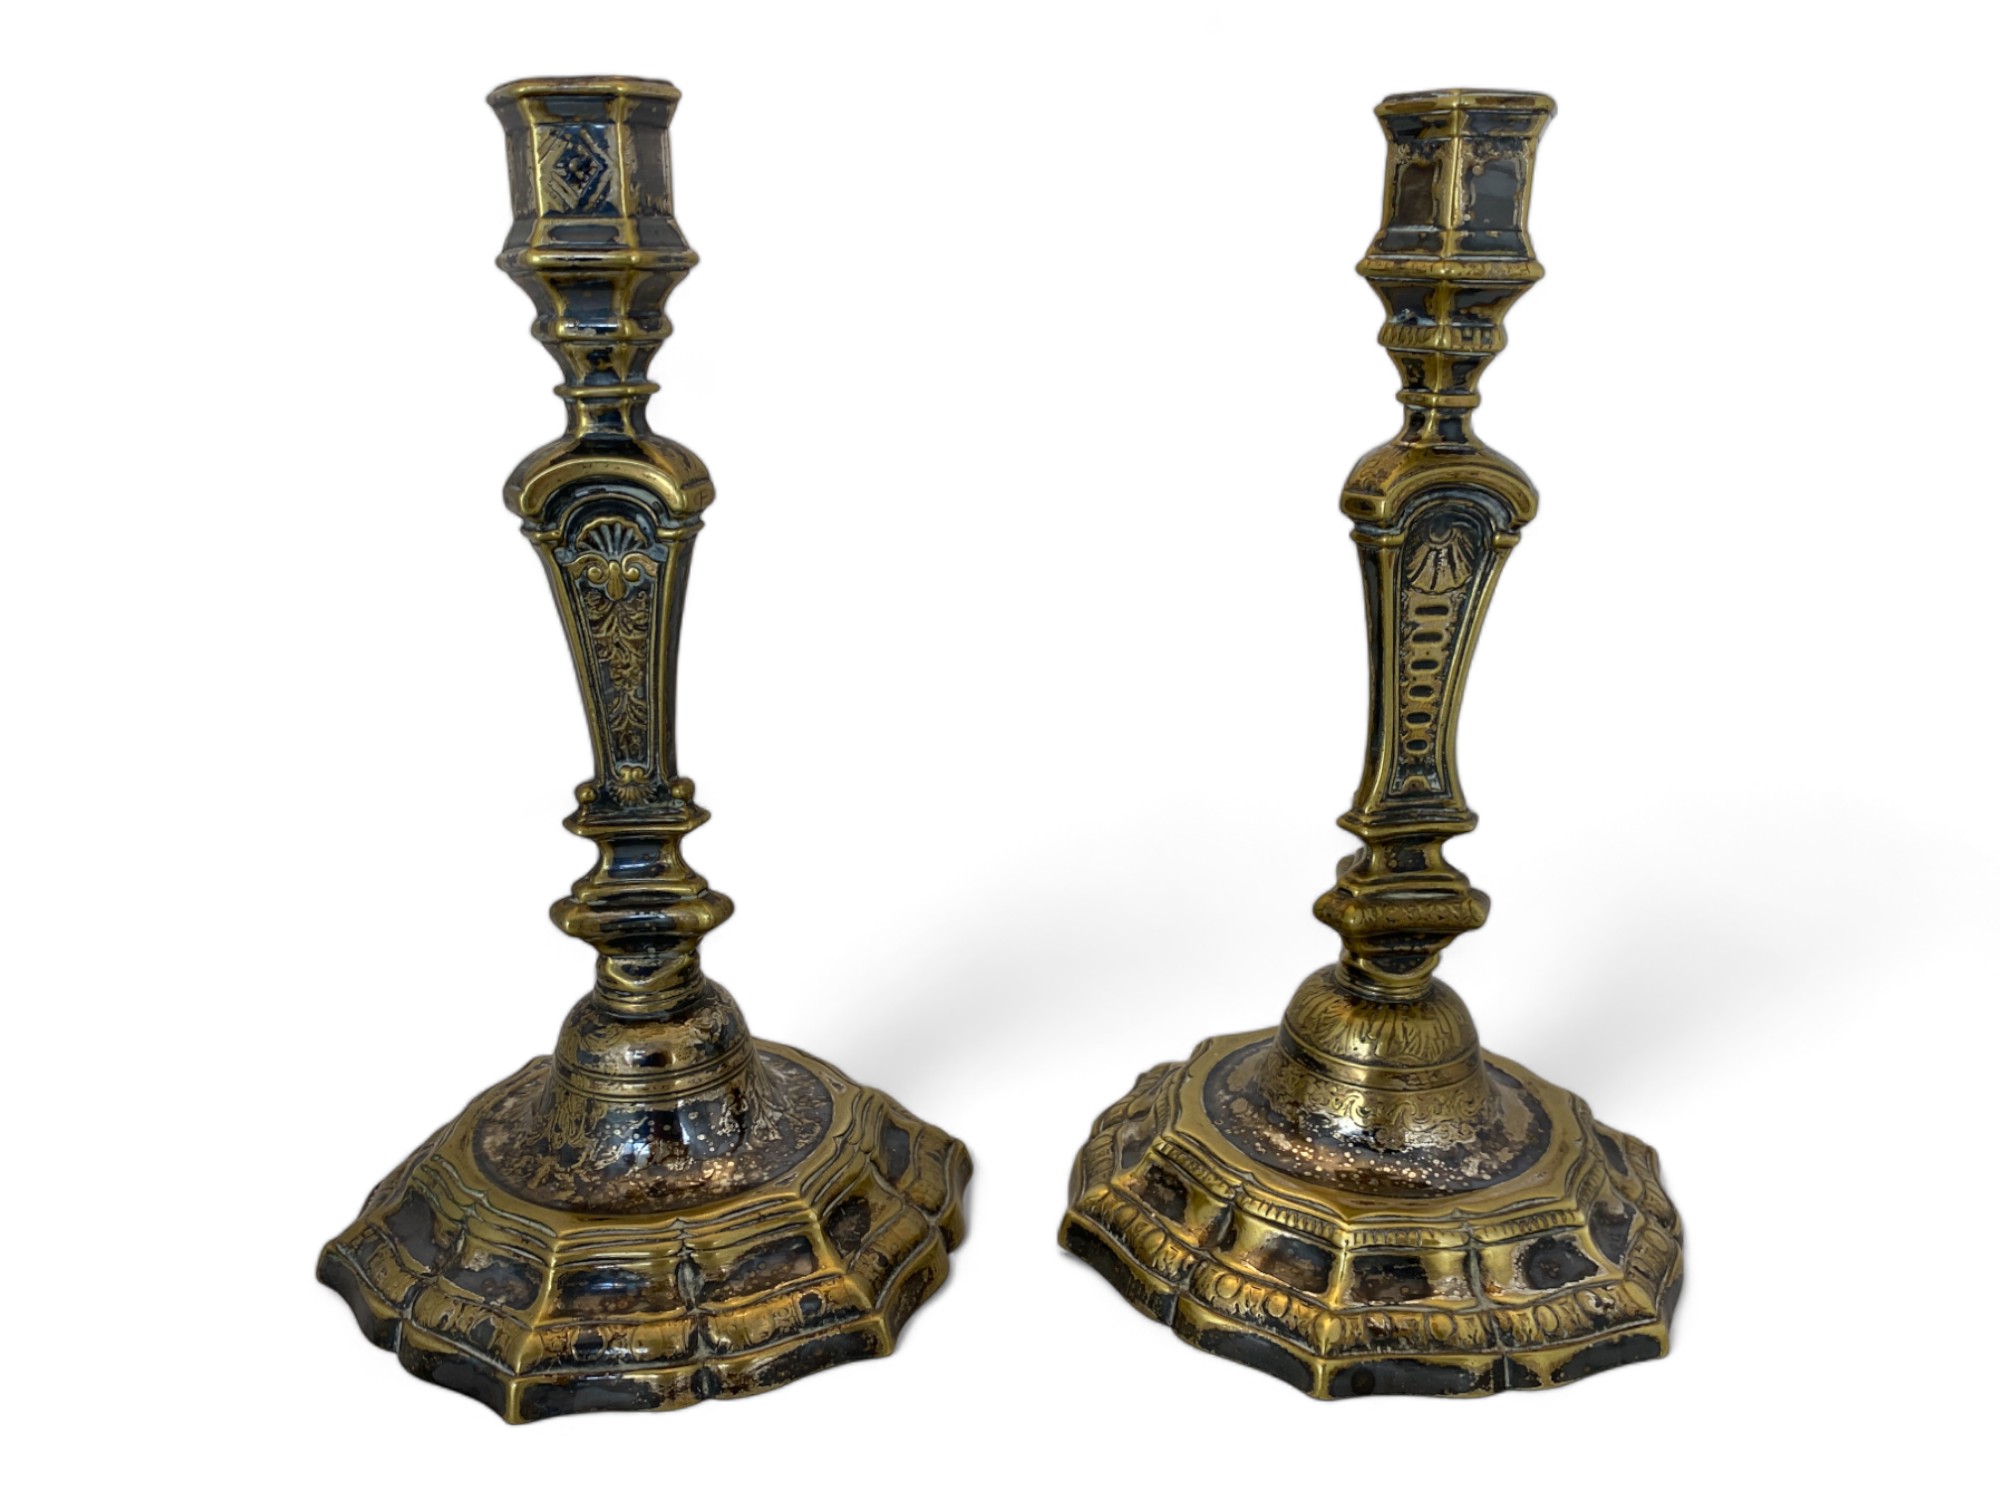 A closely matched pair of French Regence style silvered brass candlesticks, probably early 18th cent - Image 3 of 5